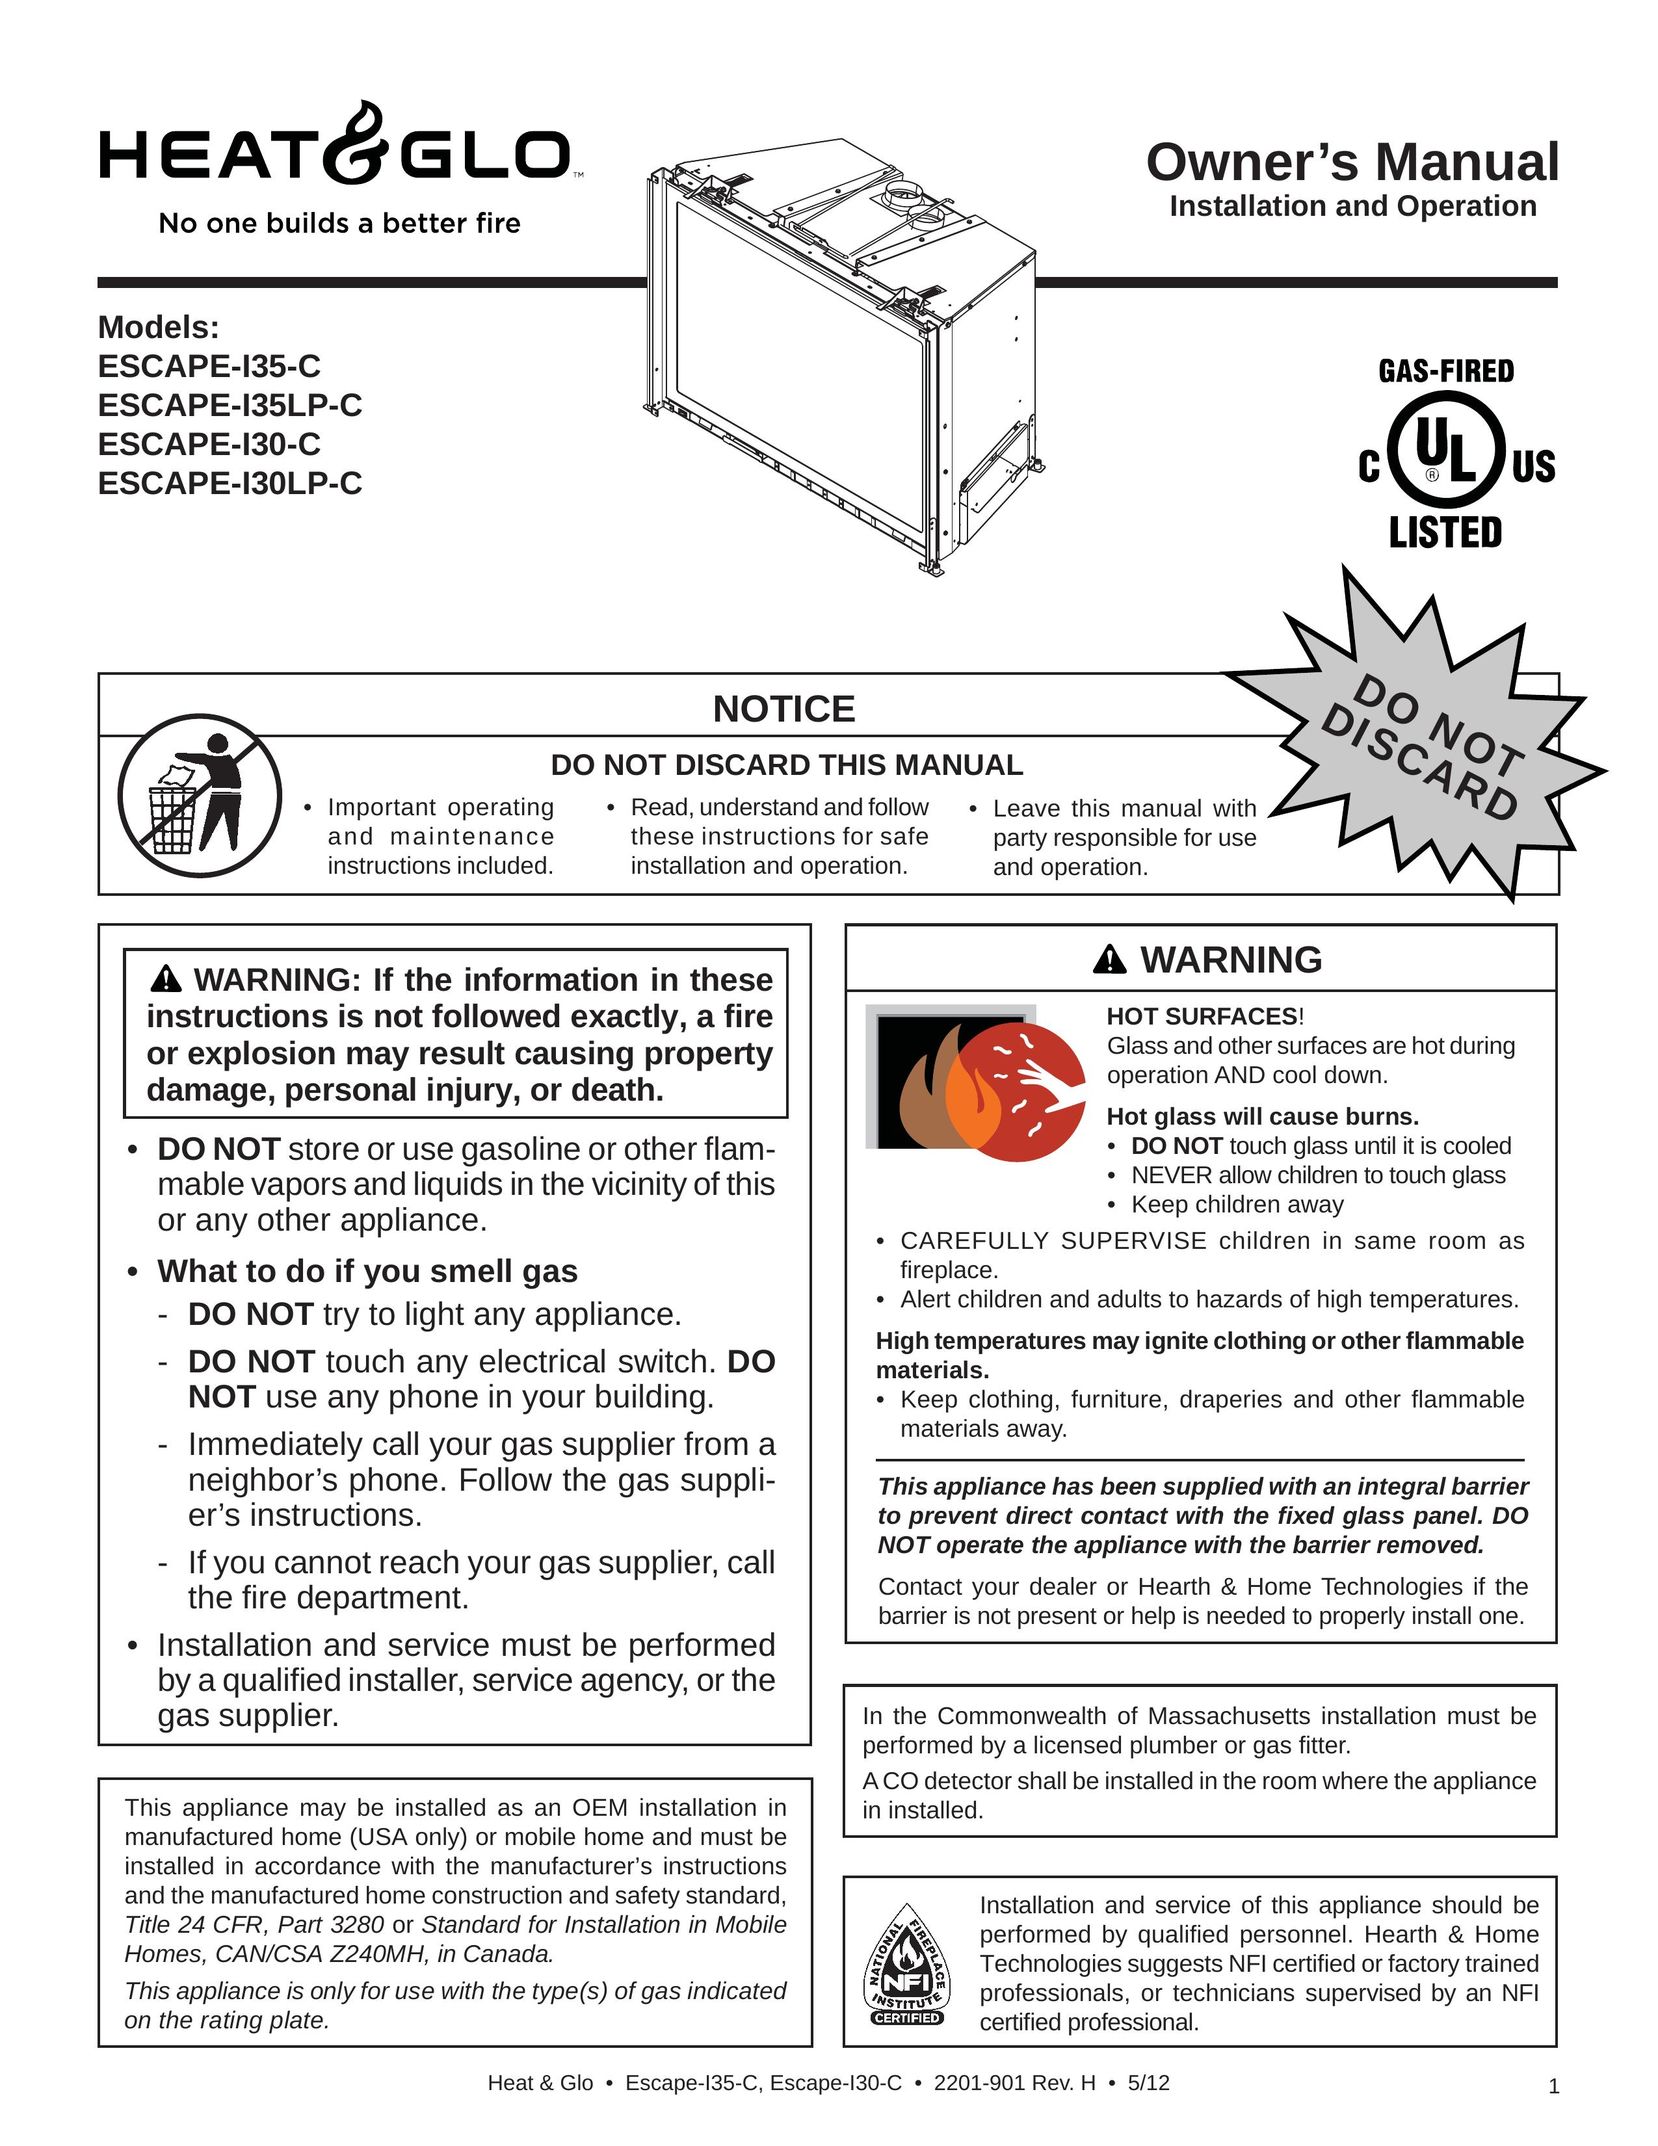 Heat & Glo LifeStyle ESCAPE-I35-C Heating System User Manual